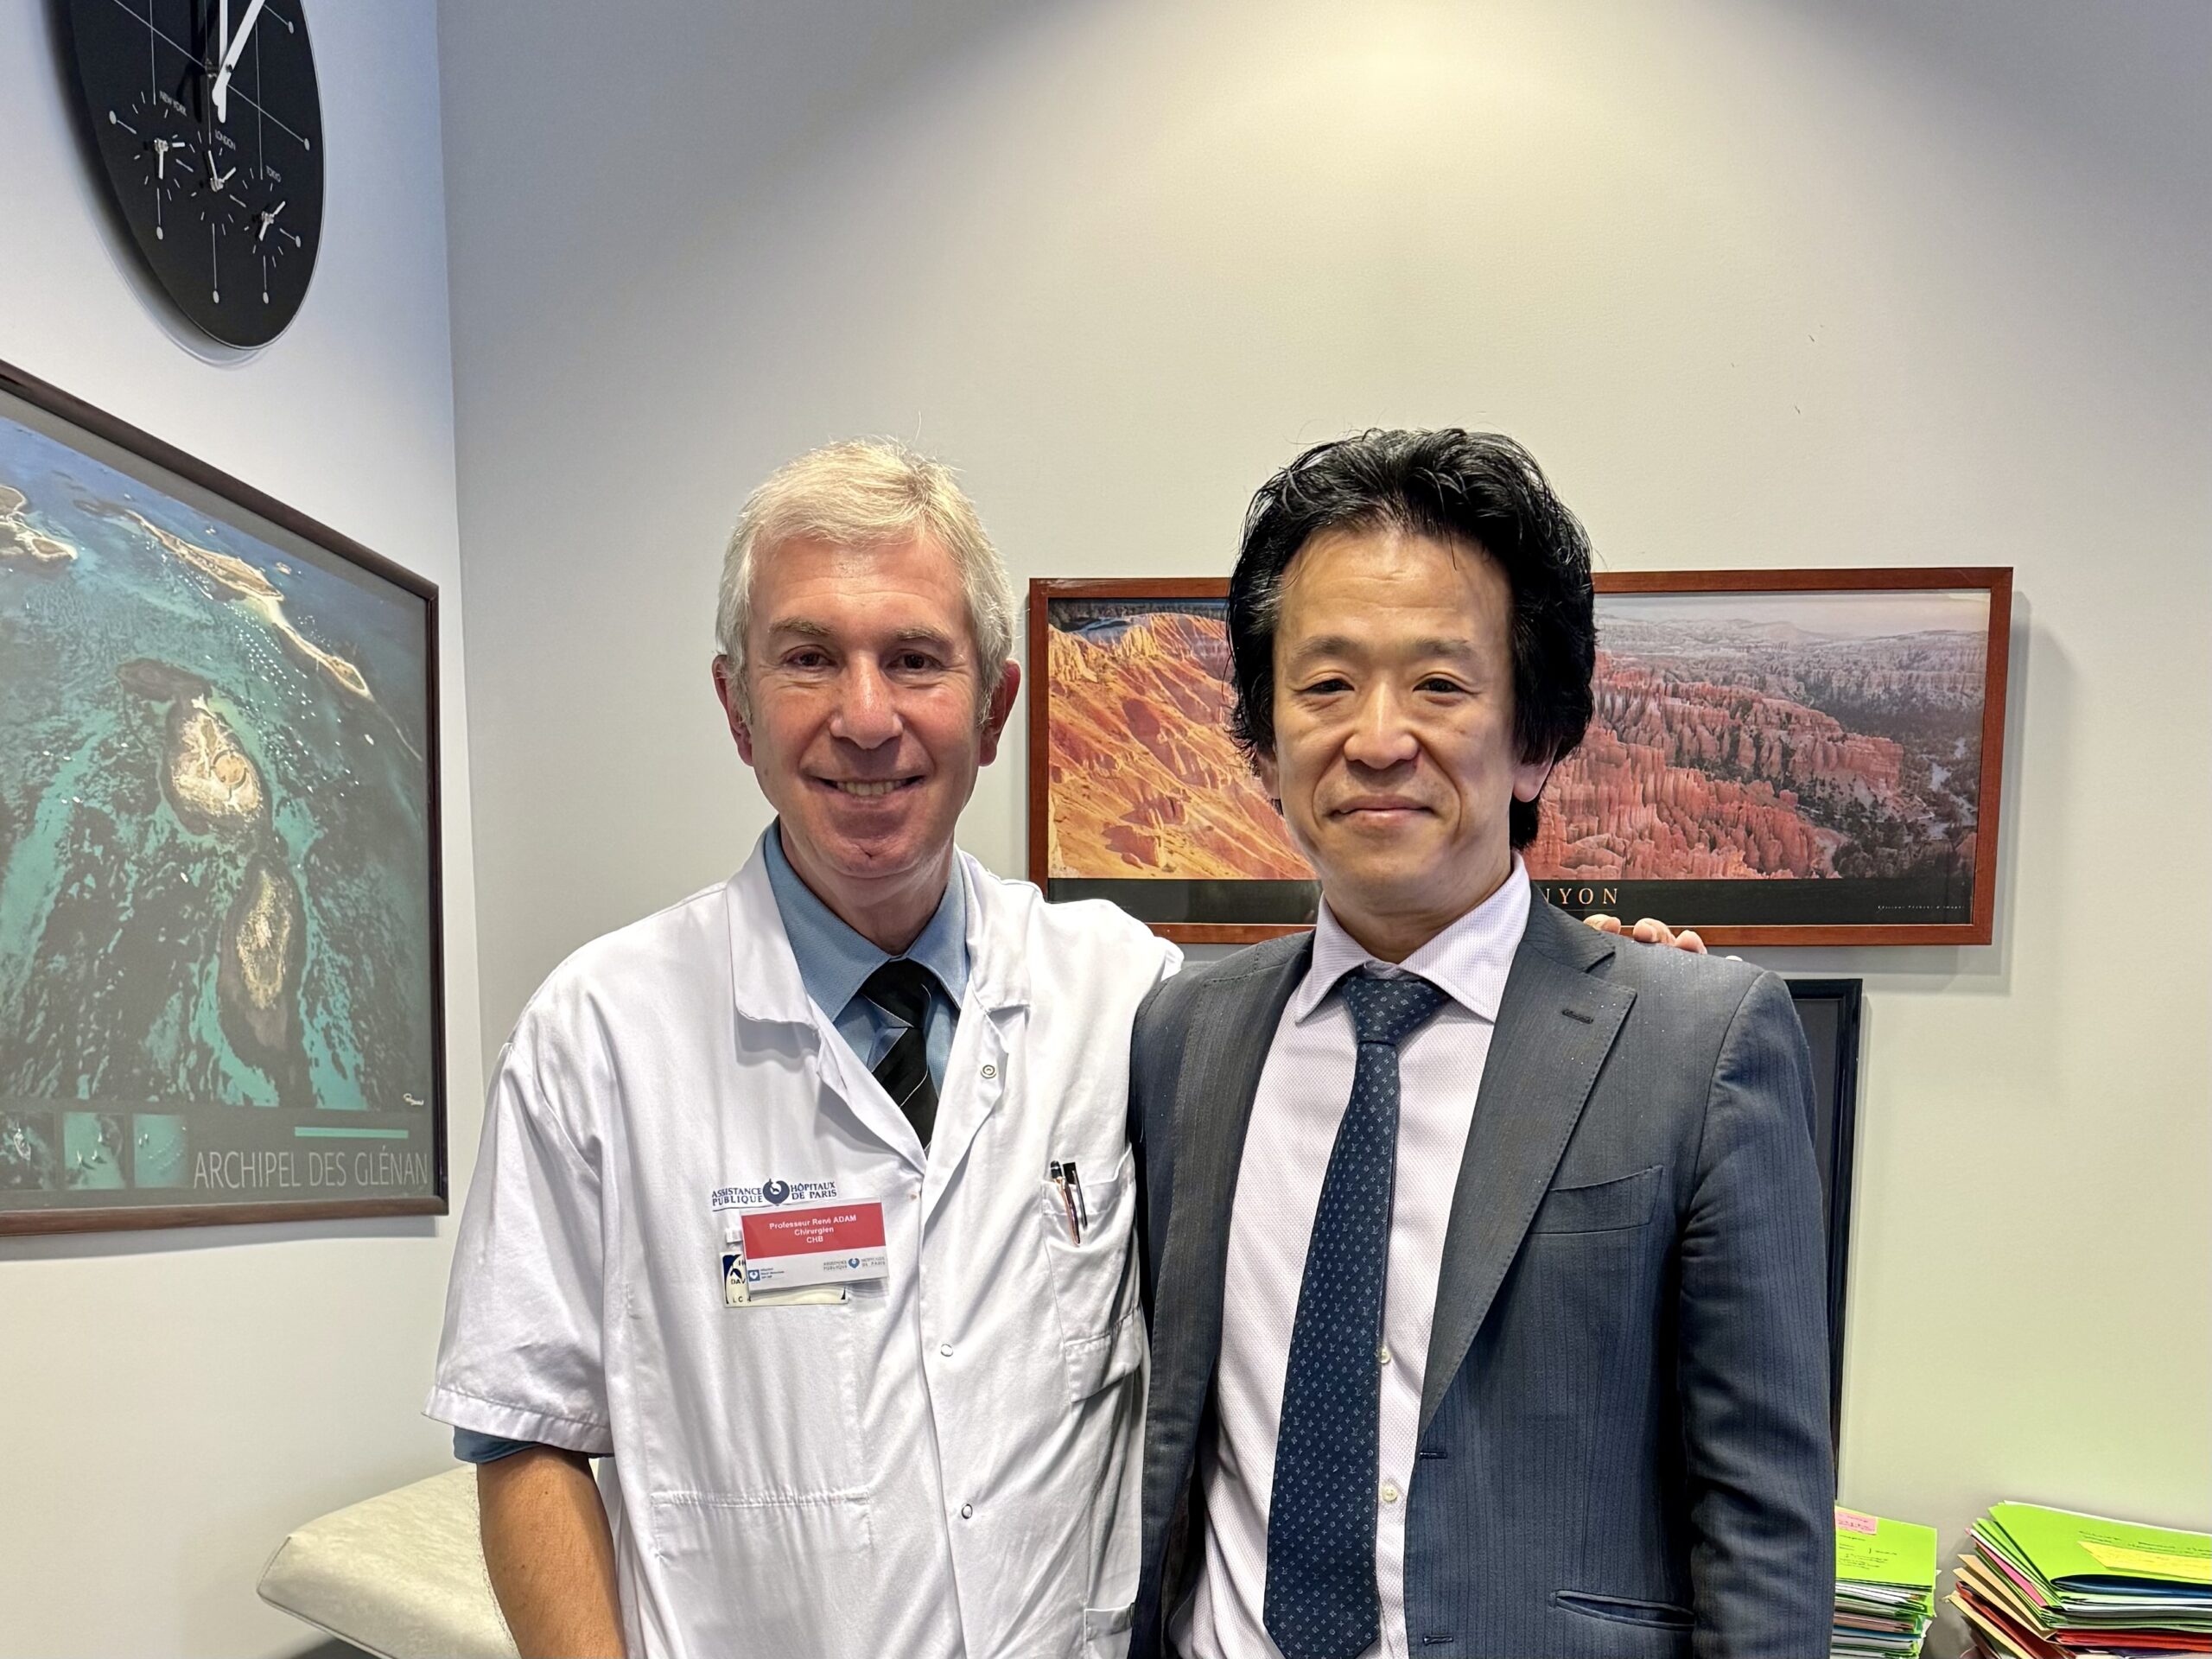 Yoshinori Kagawa 賀川　義規 Hospital Paul Brousse in Paris Rene Adam Prof. Adam is definitively opening the new era in the treatment for liver mets of CRC with hope of patients and their families. I was more than happy to feel their great hospitality and atmosphere, and made me more passionate for treatment developments for CRC.